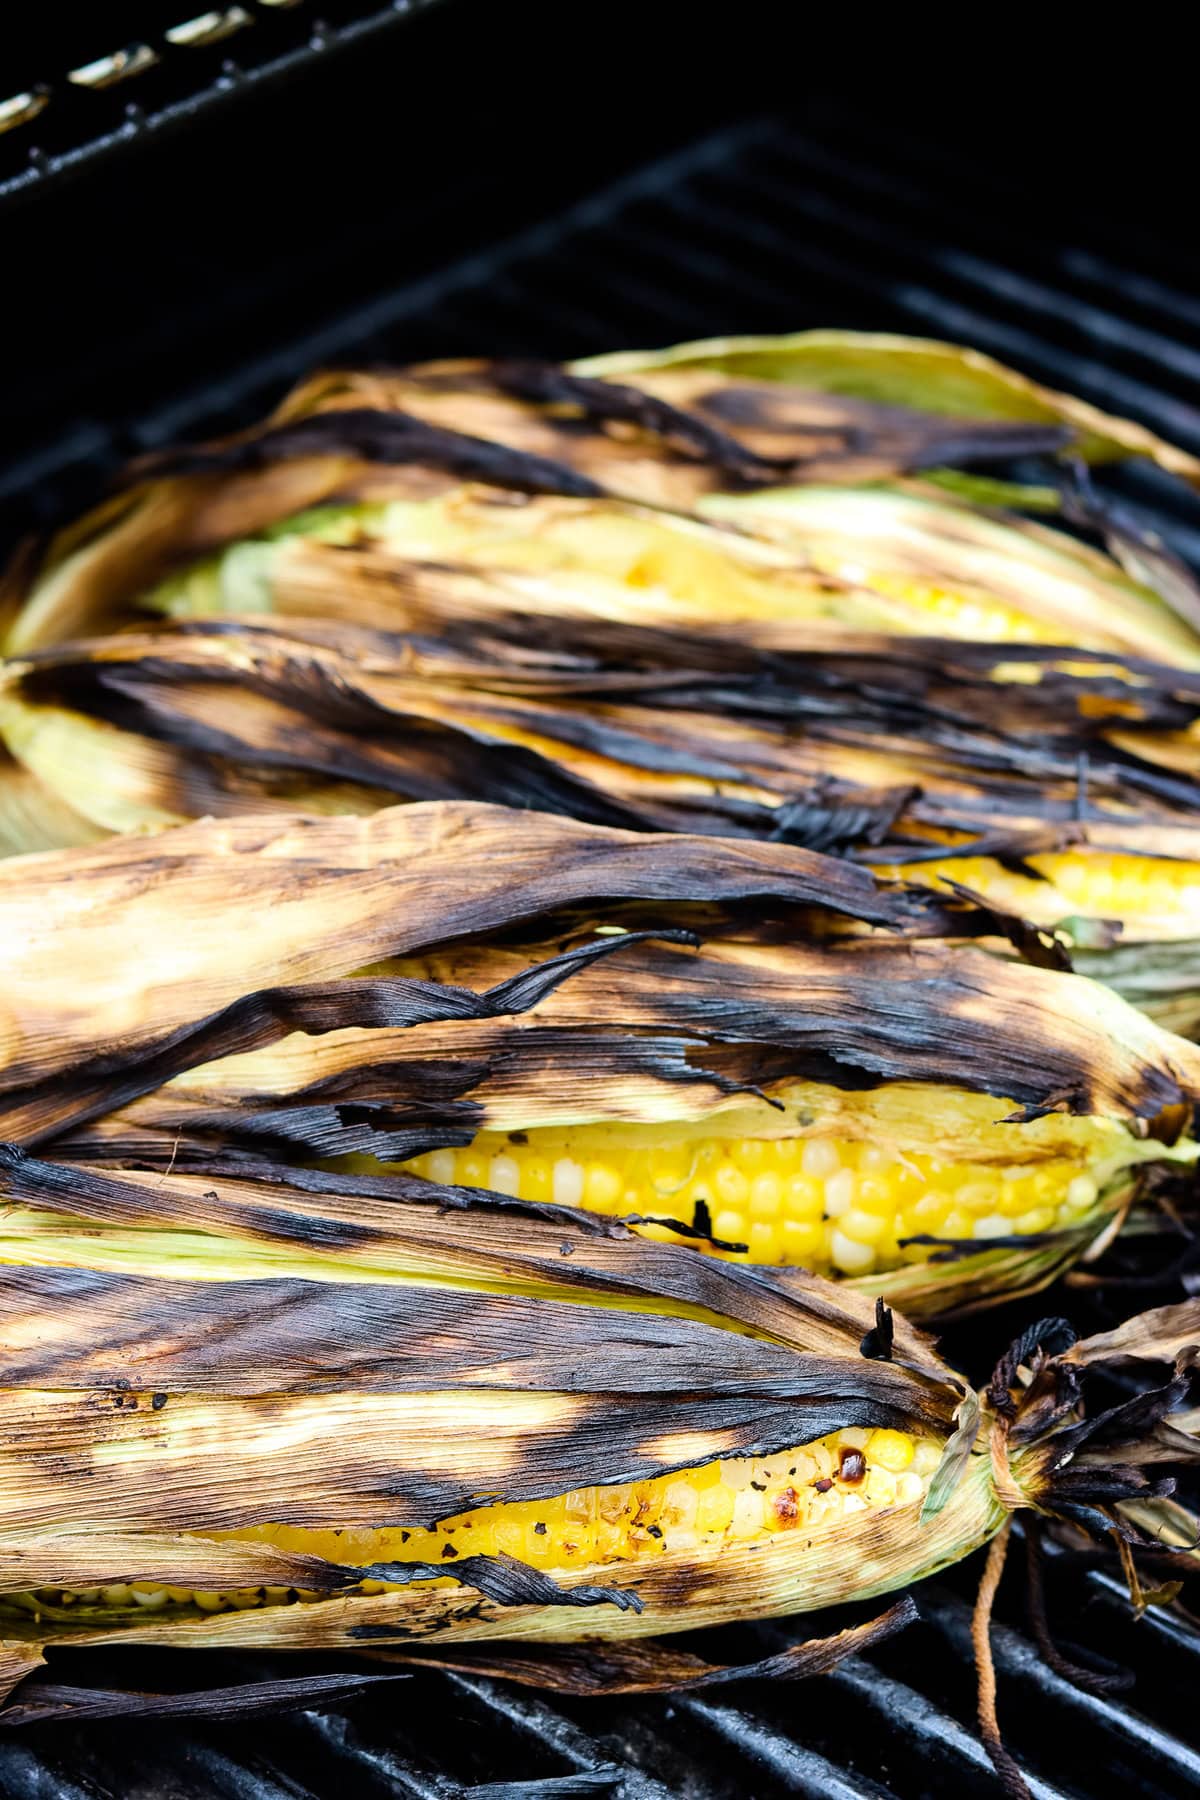 Corn on the cob with husk on grill